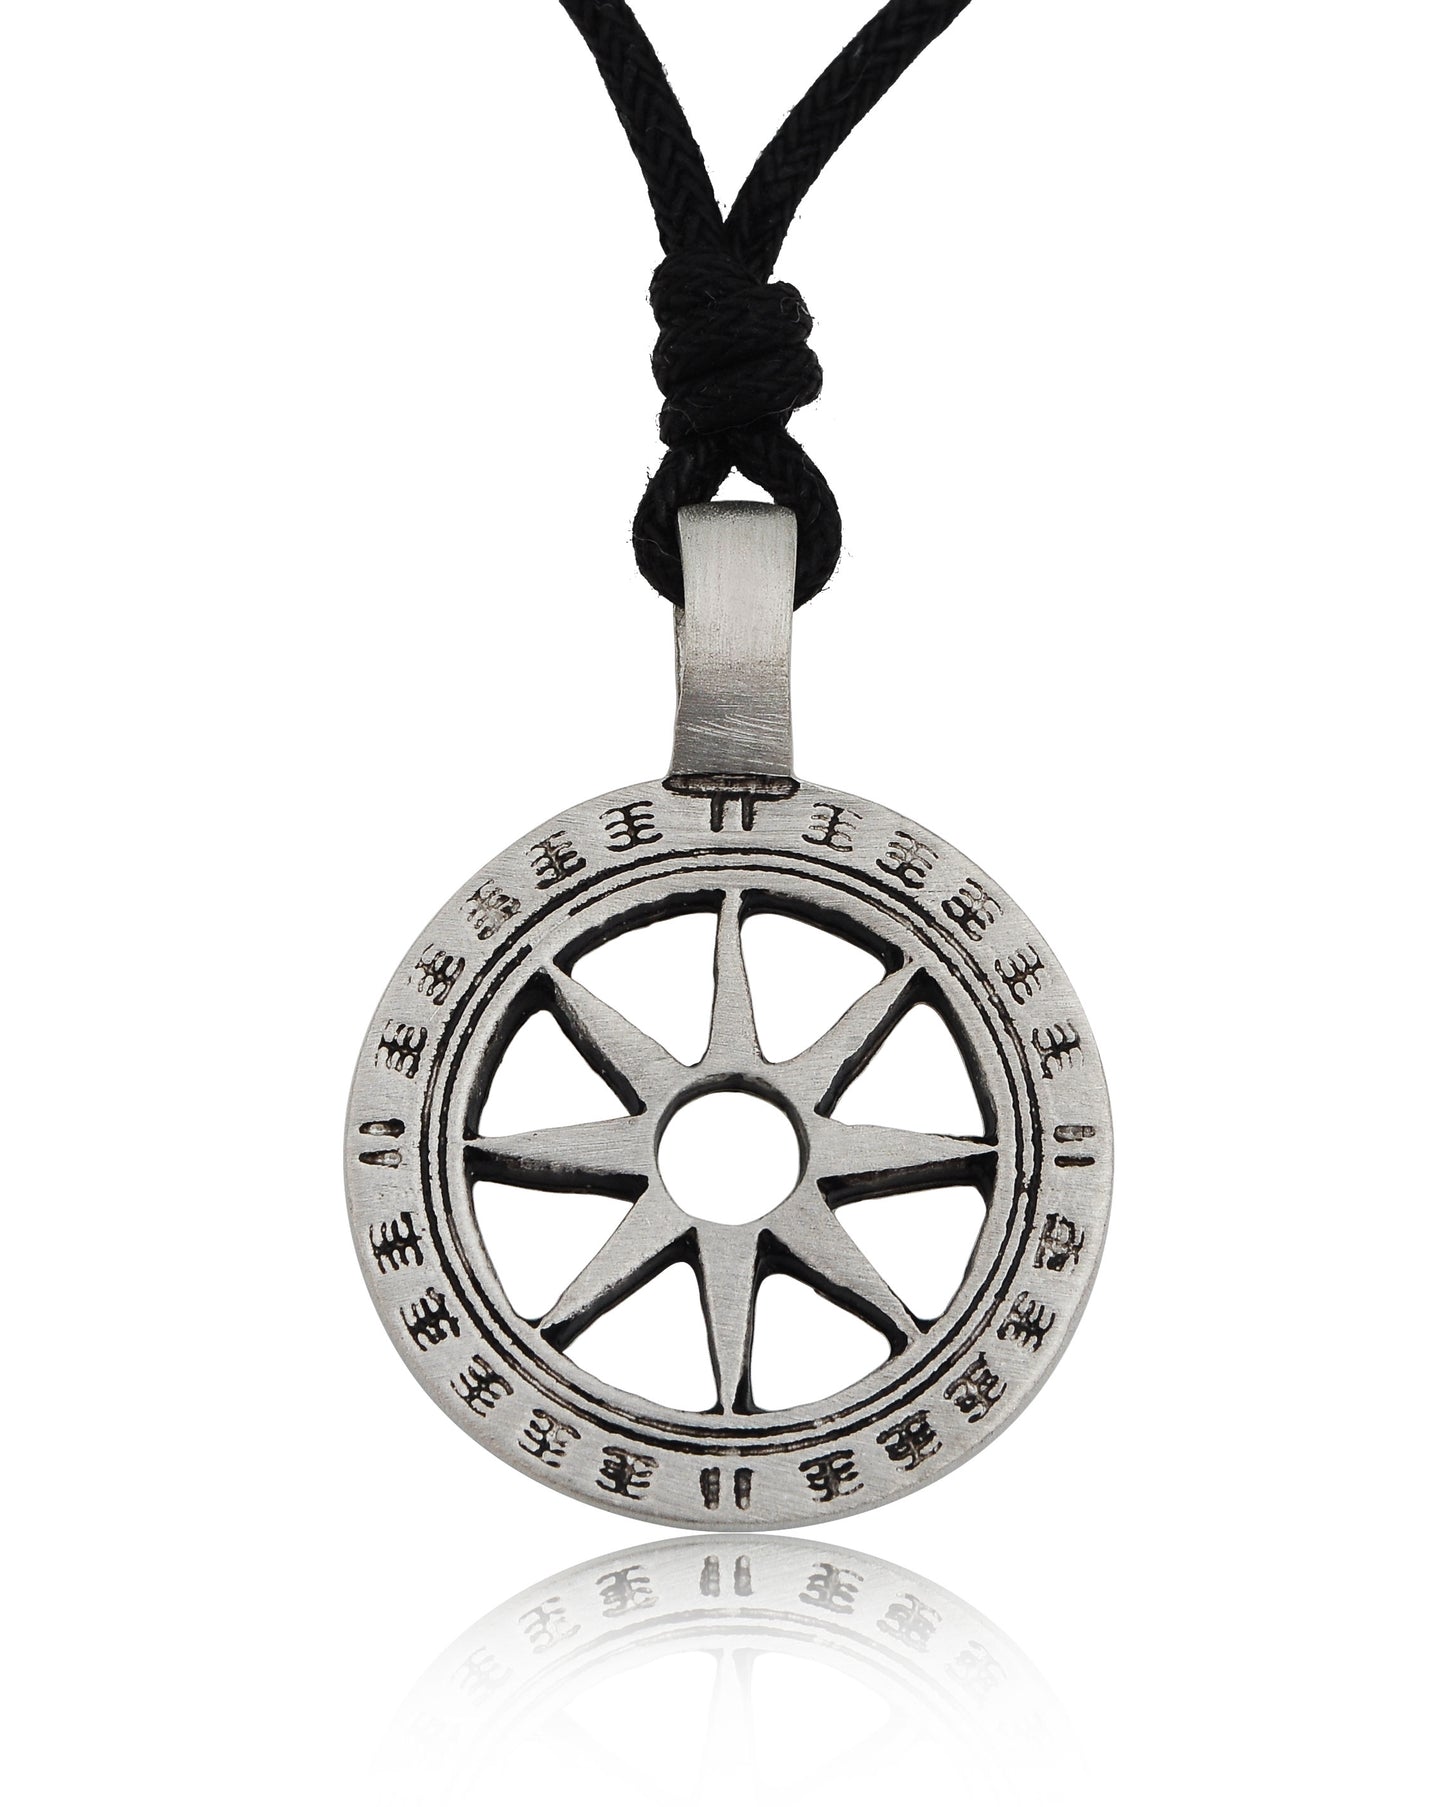 Mayan Sun Symbol Silver Pewter Charm Necklace Pendant Jewelry With Cotton Cord